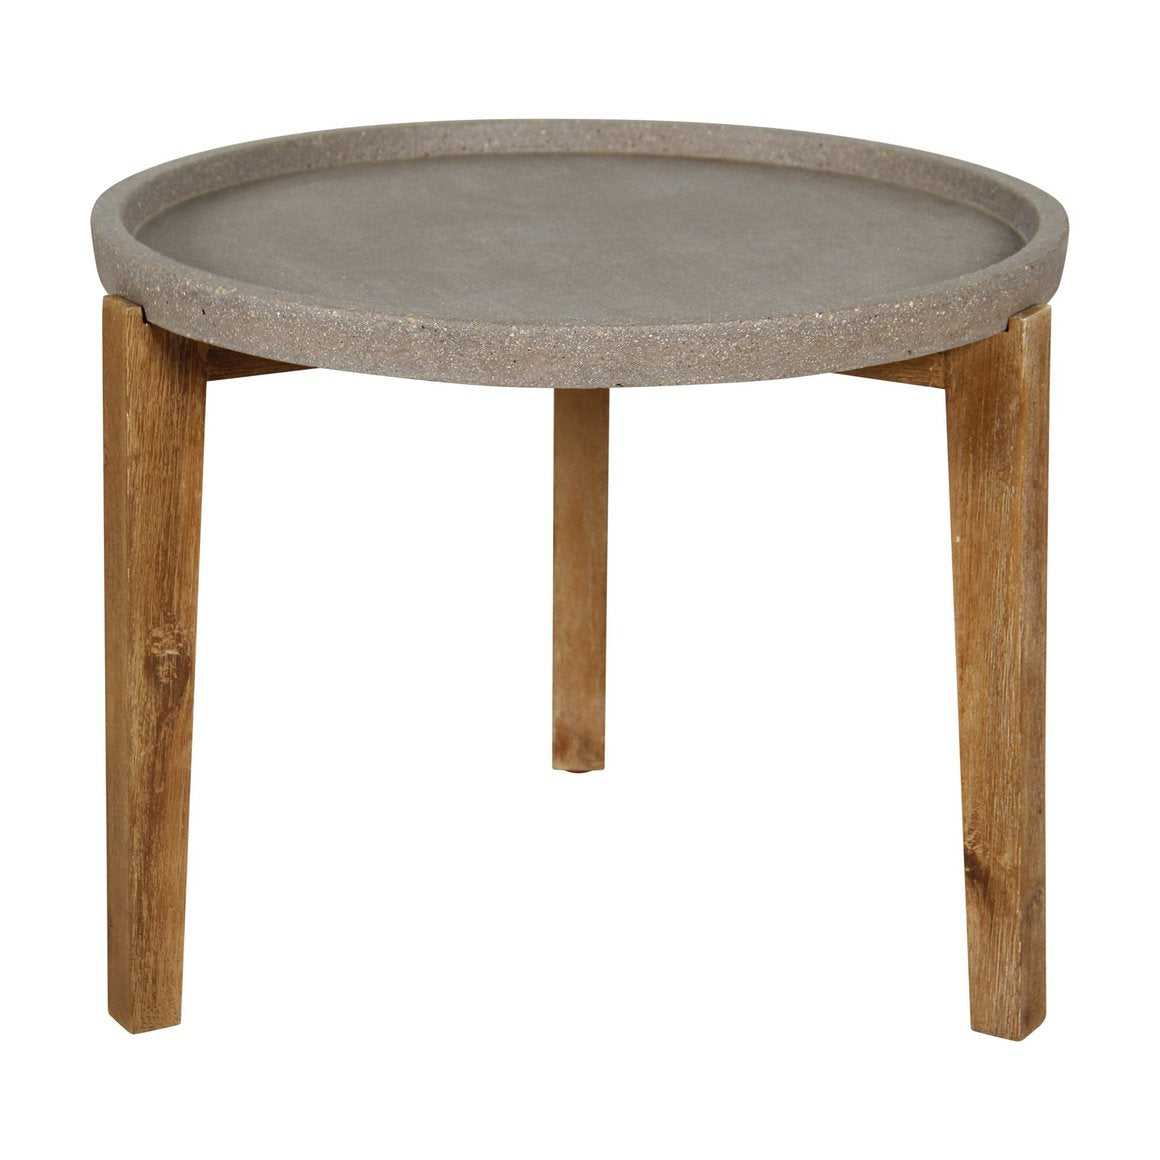 Picture of Patio Small Round Garden Table